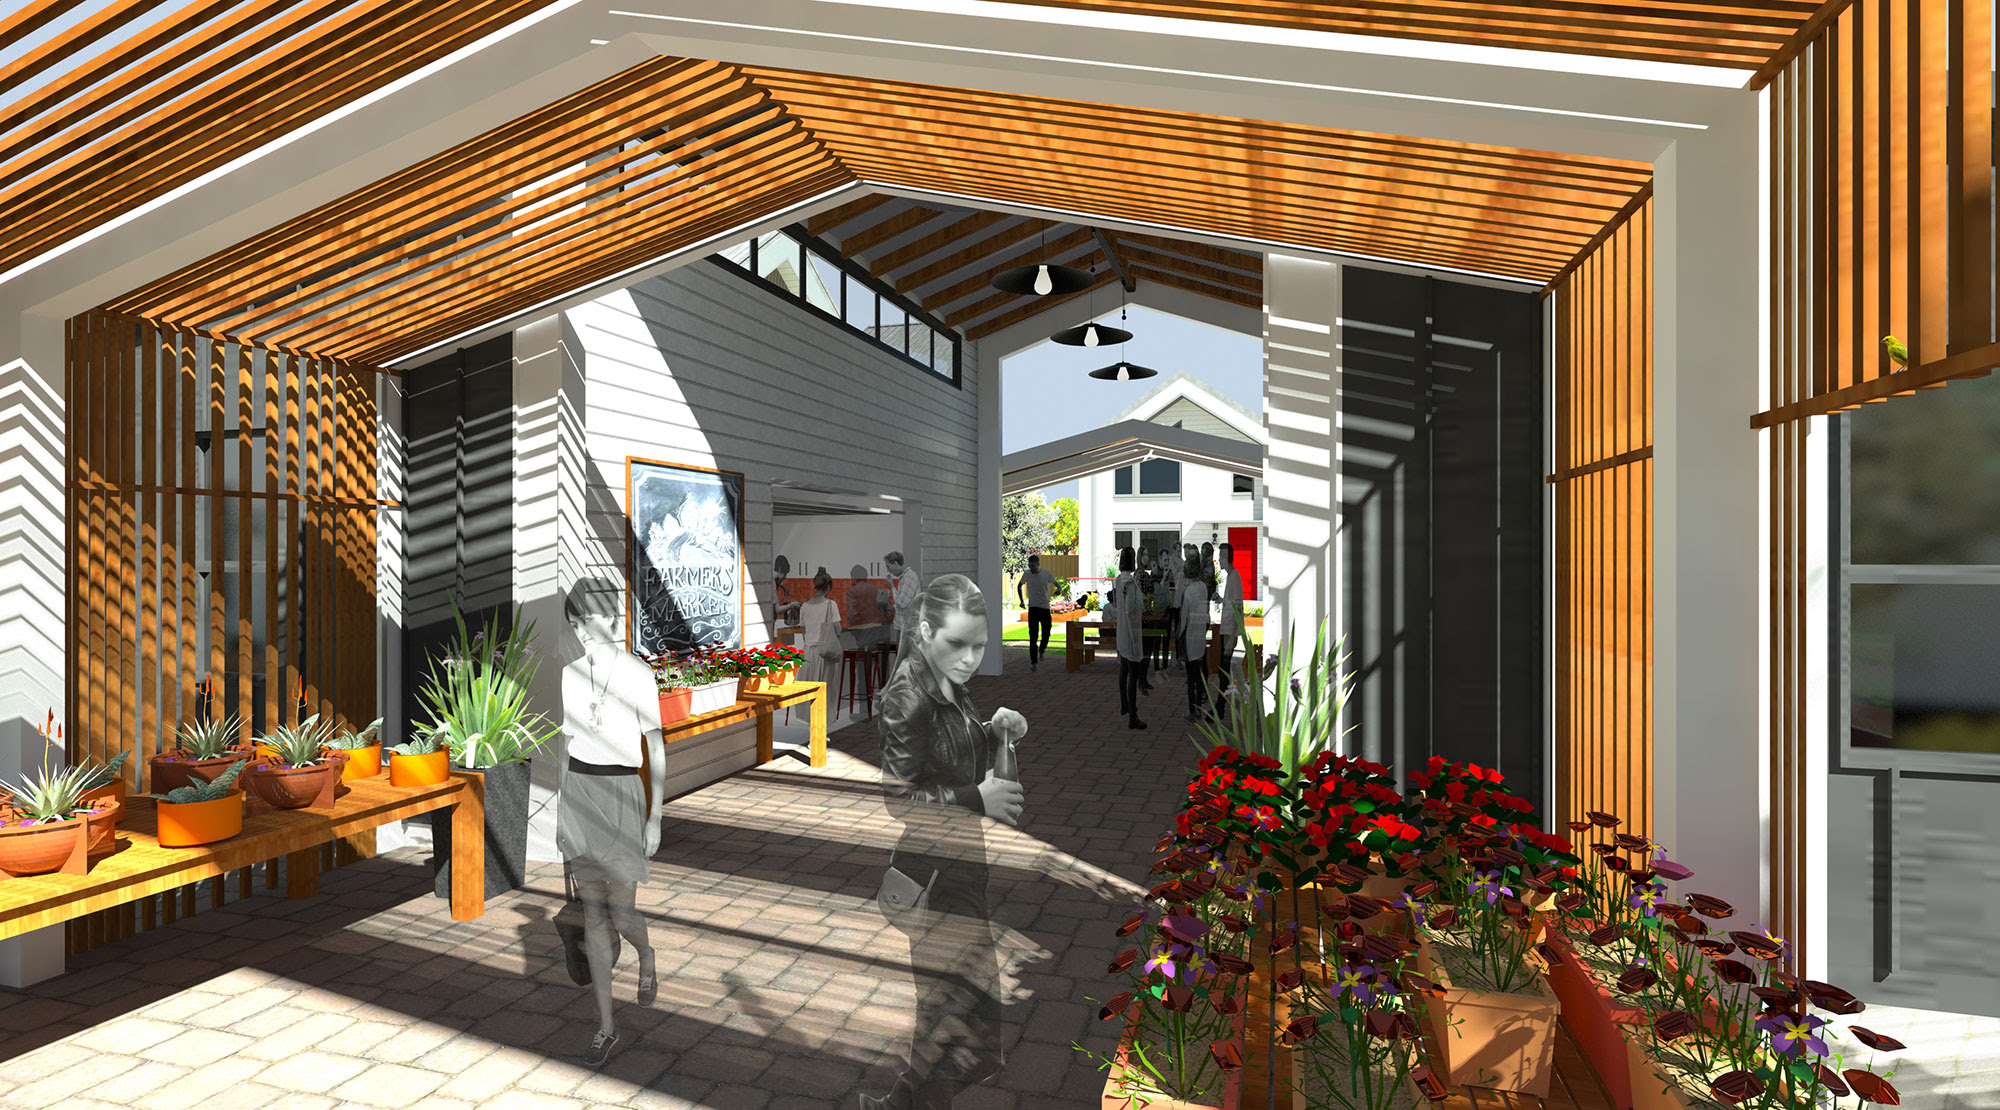 Rendering of breezeway of Commons Building at The Patch; people browsing aisles of produce